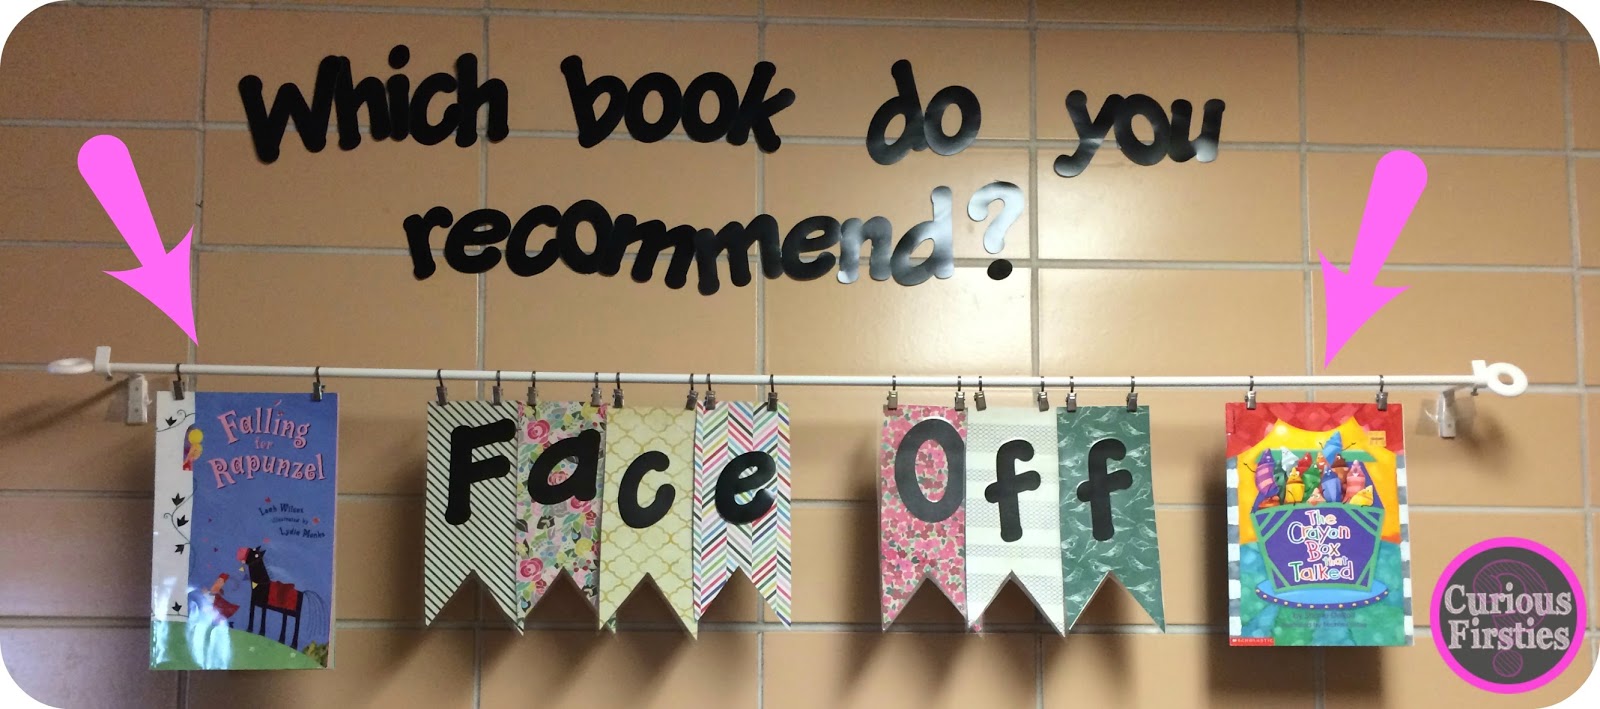 engage students by asking them to recommend books to others